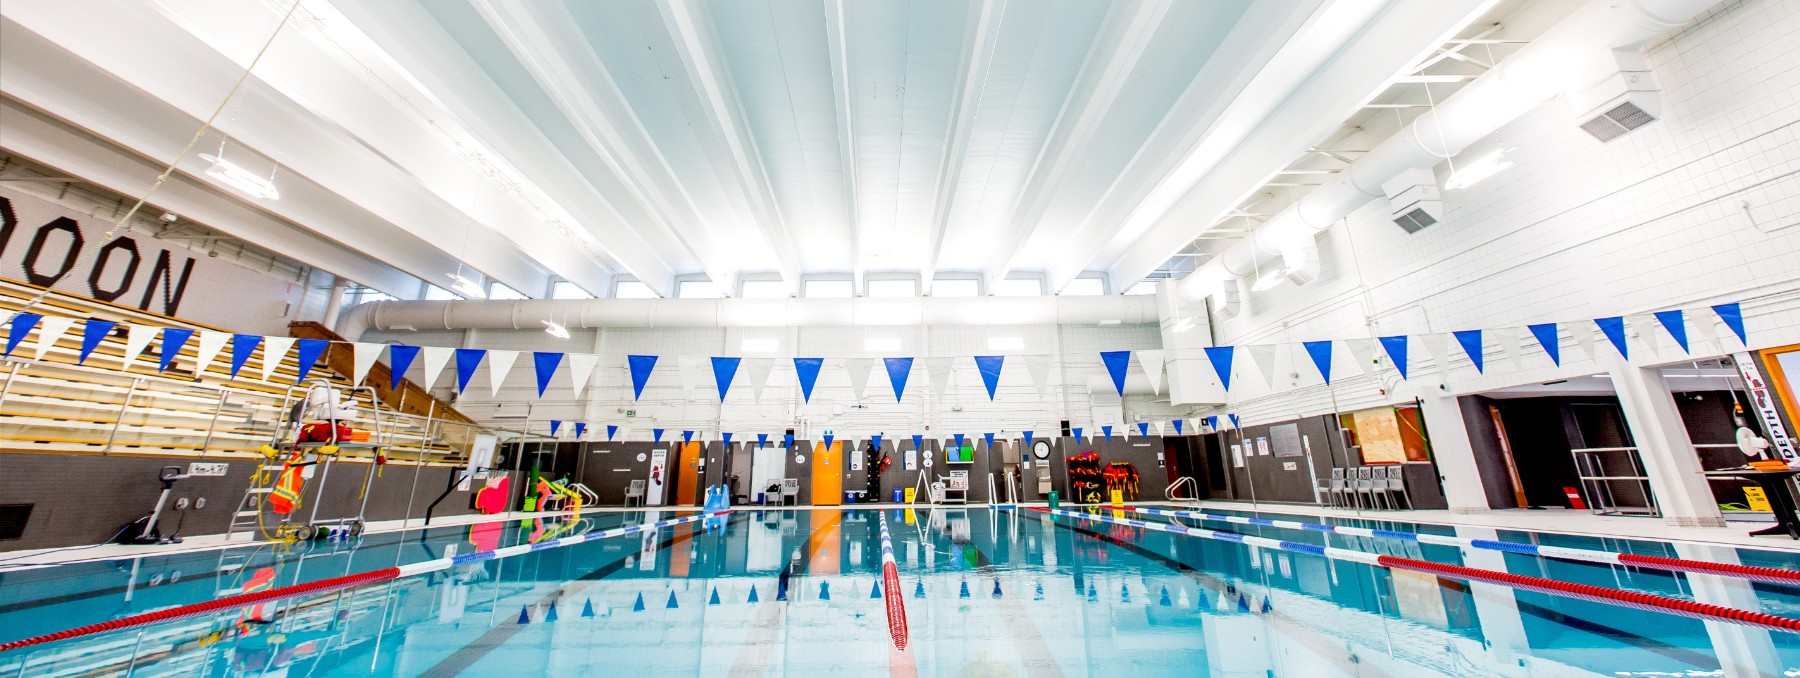 A photo of backstroke flags hanging above a large, bright blue pool under a bright white lit up ceiling.